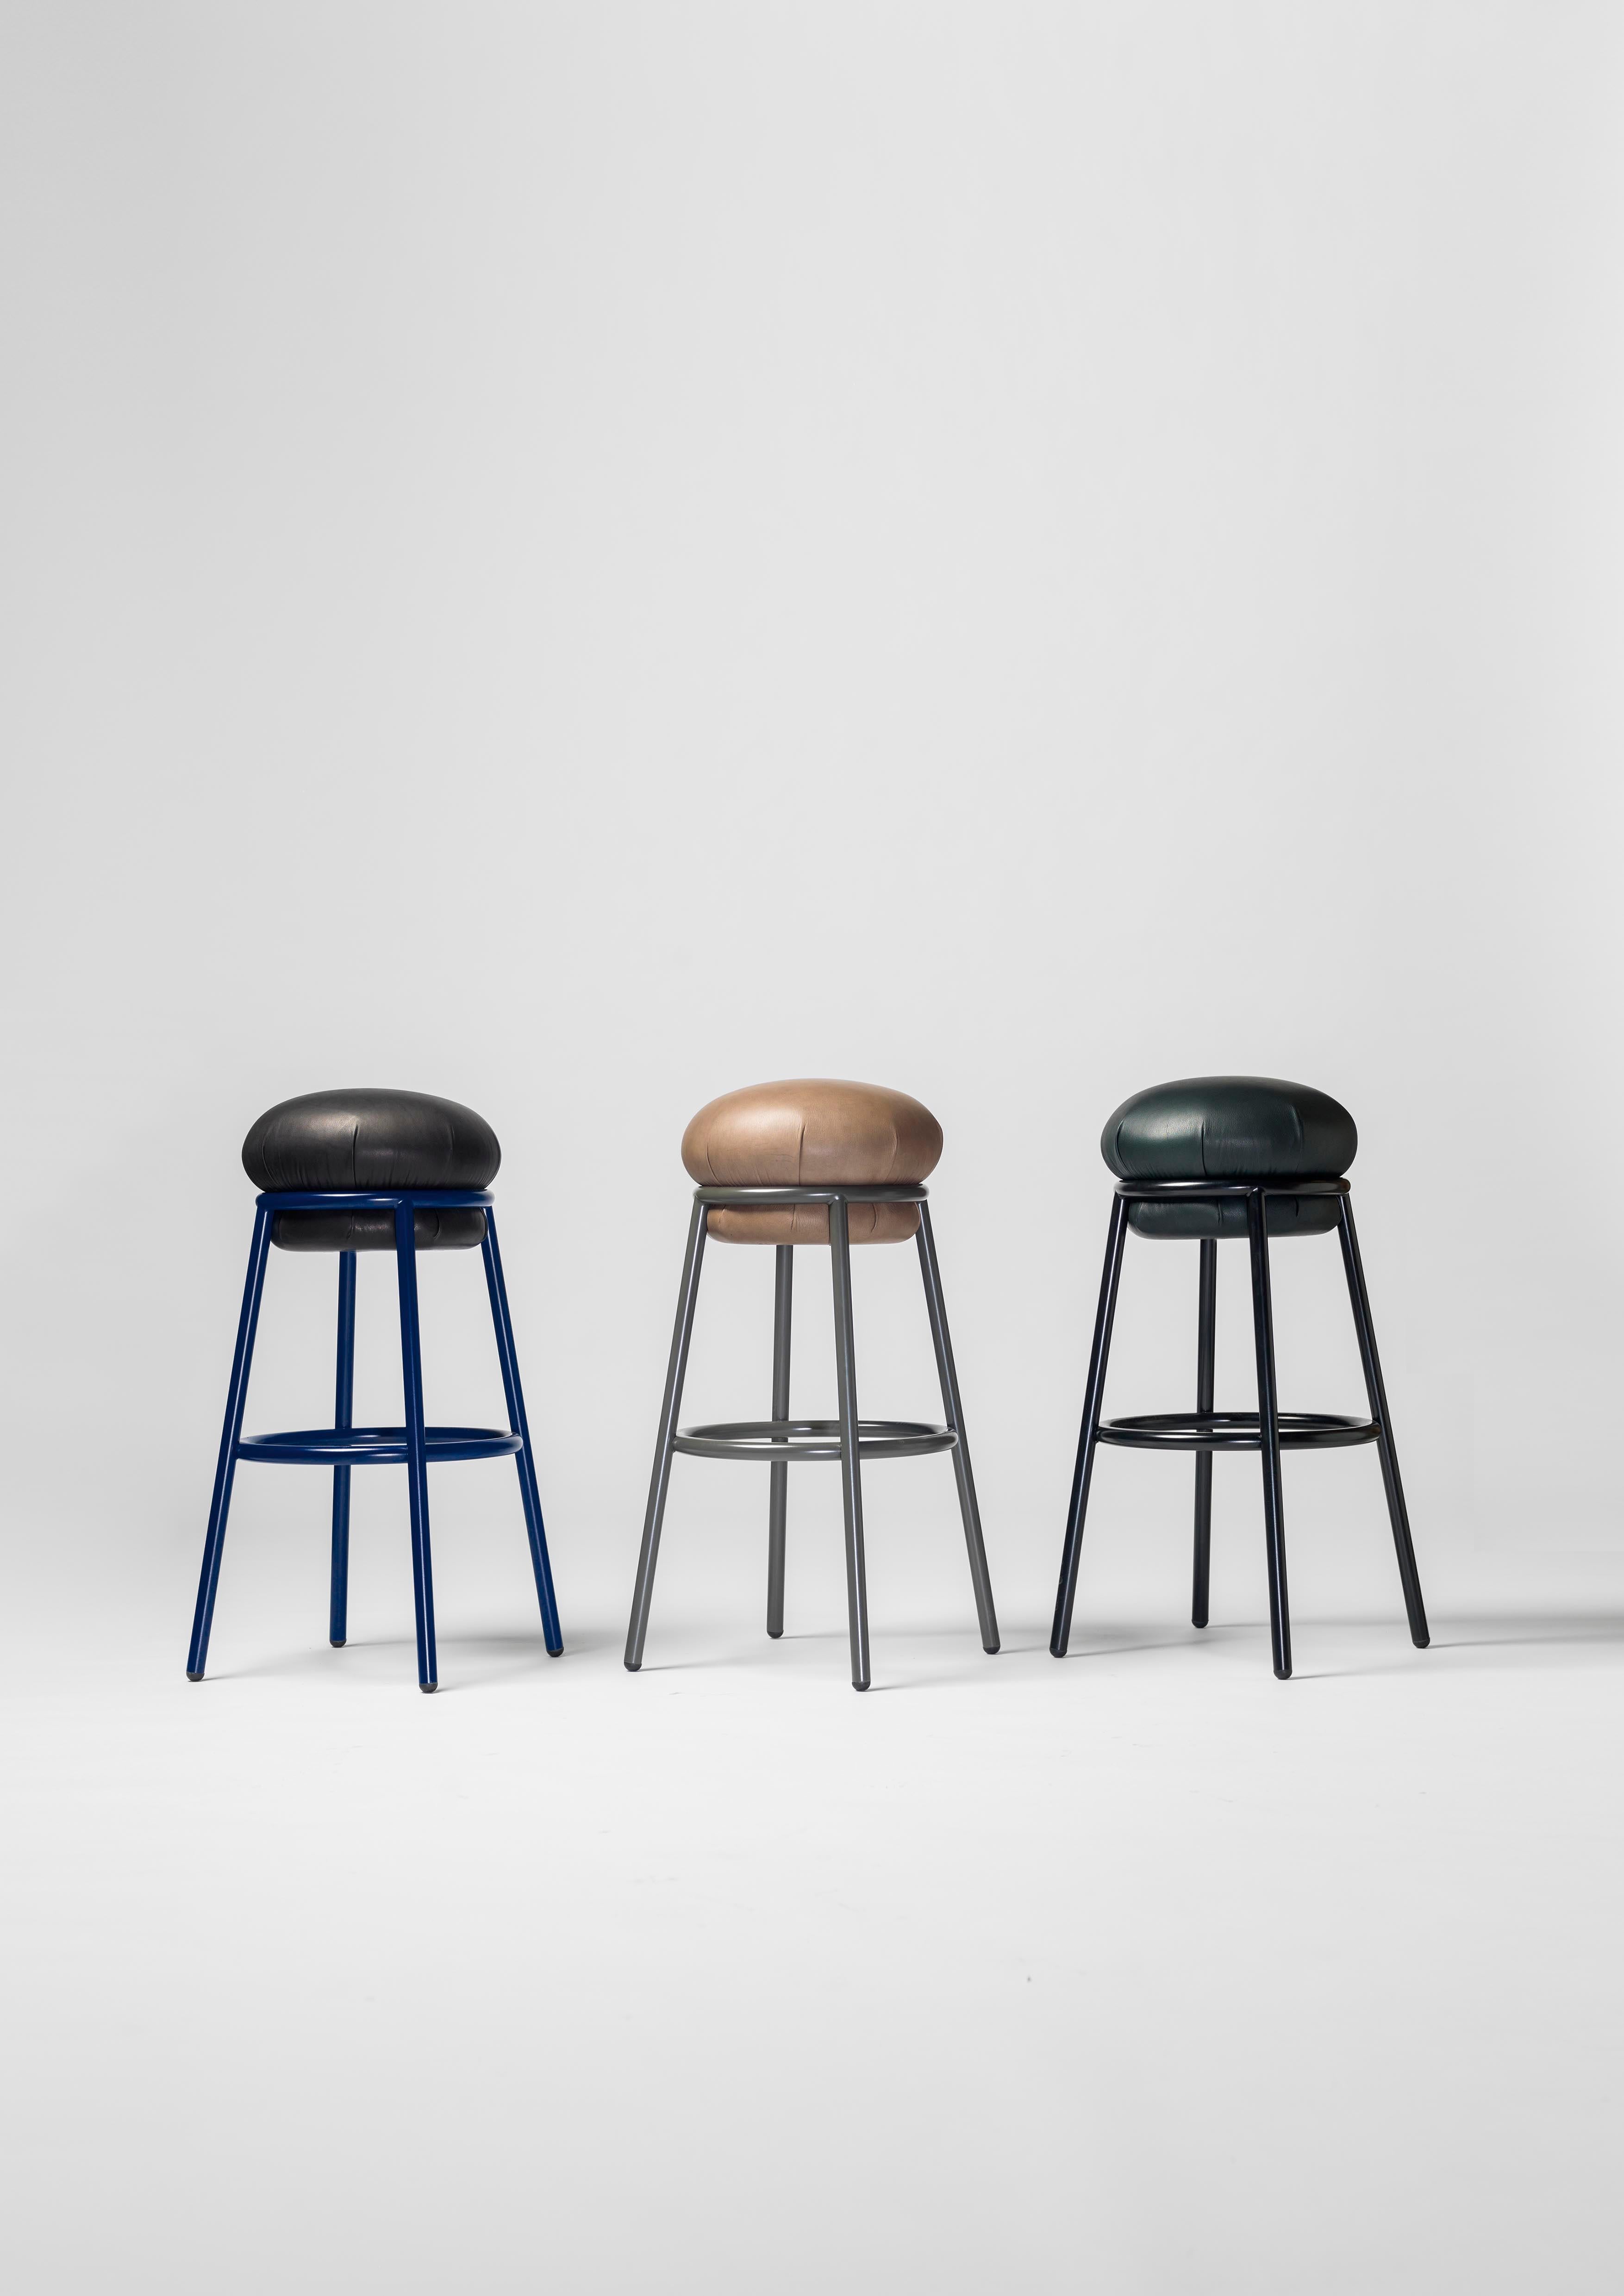 “Grasso is not fat. Grasso is more than fat. It’s overflowing.” This is how Stephen Burks sums up his new collection for BD. The stool perfectly complements the armchair and is made in the same structure and upholstery colors. It stands out due to